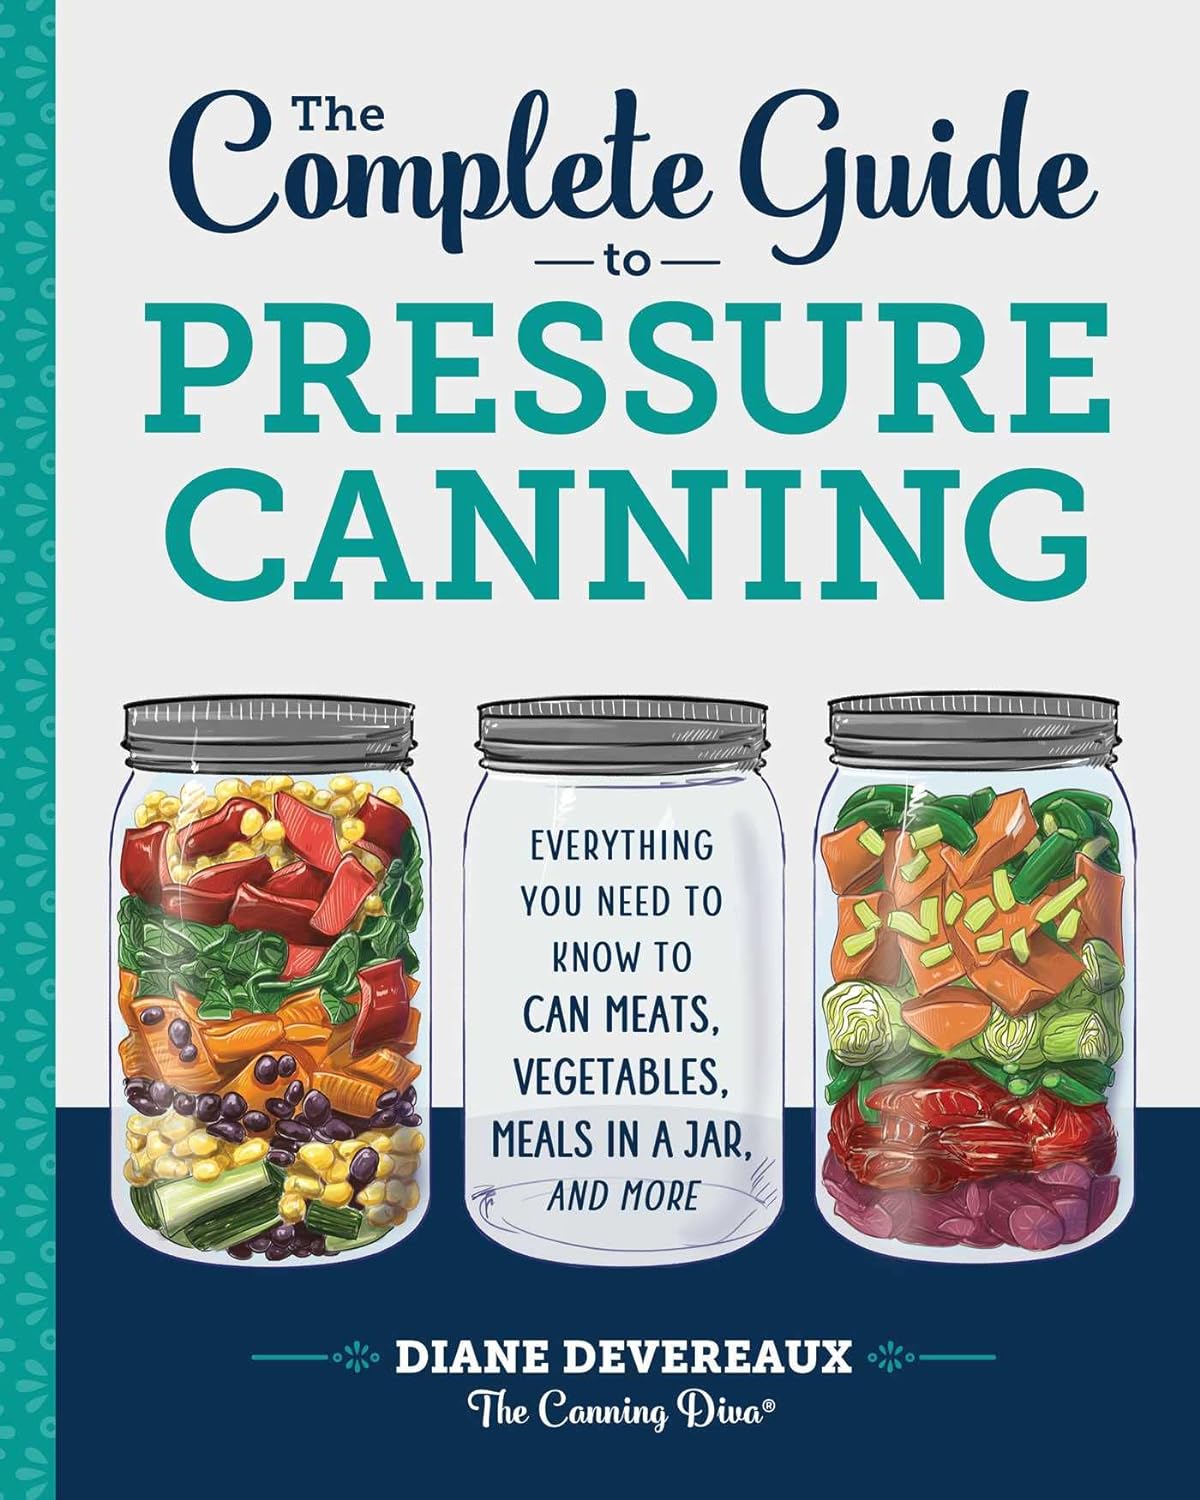 The Complete Guide to Pressure Canning: Everything You Need to Know to Can Meats, Vegetables, Meals in a Jar, and More     Paperback – July 24, 2018